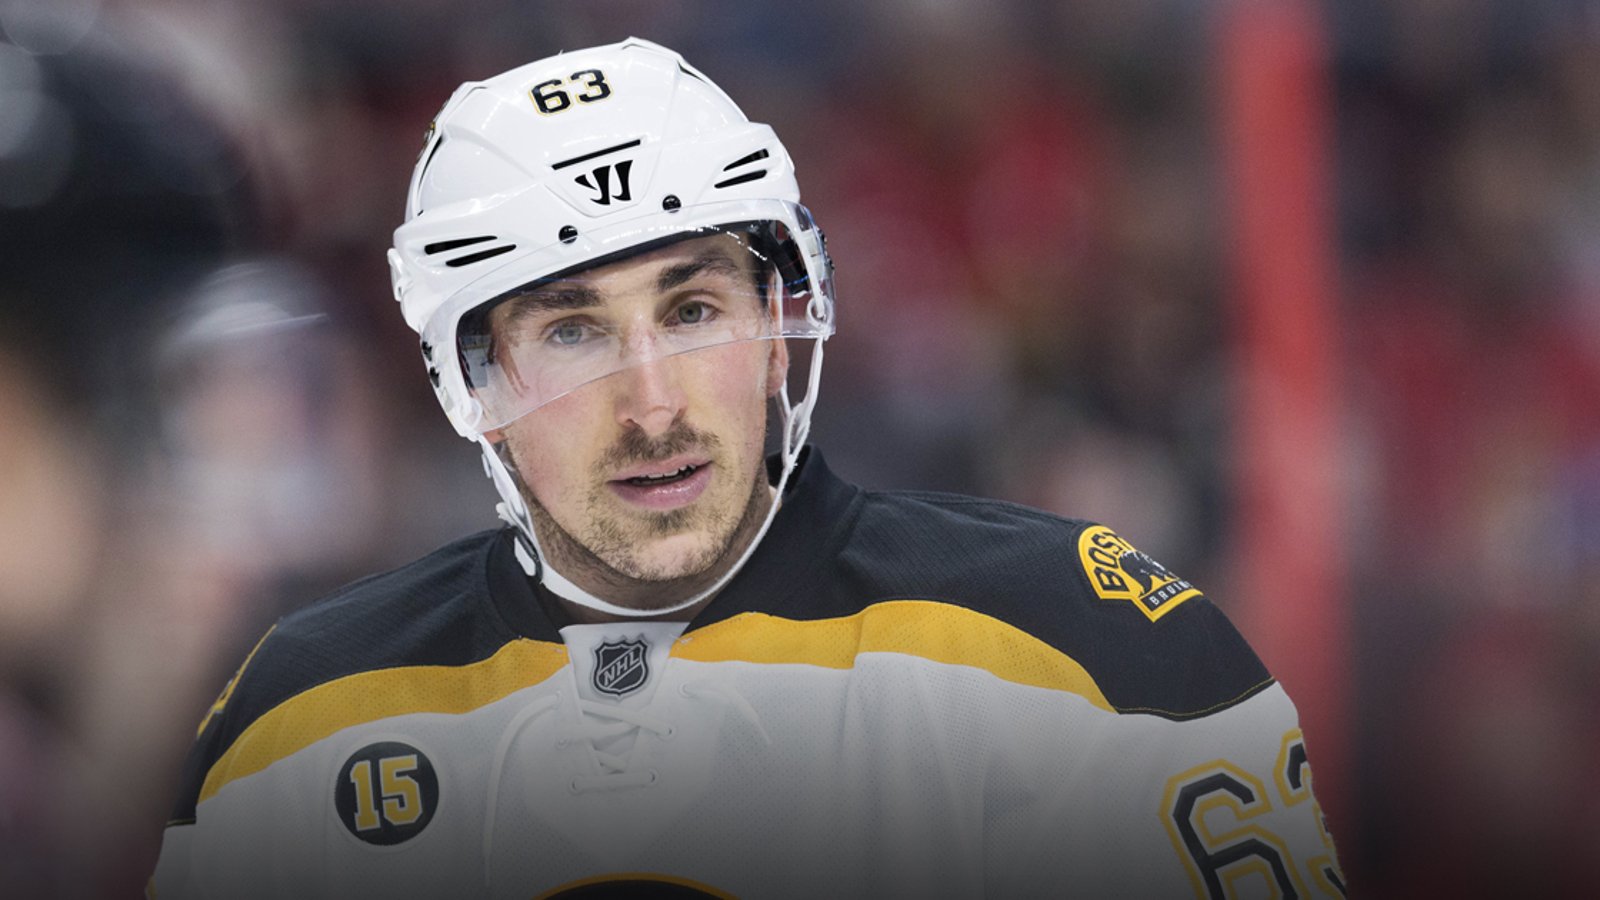 Breaking: News worsens for Marchand and Bjork